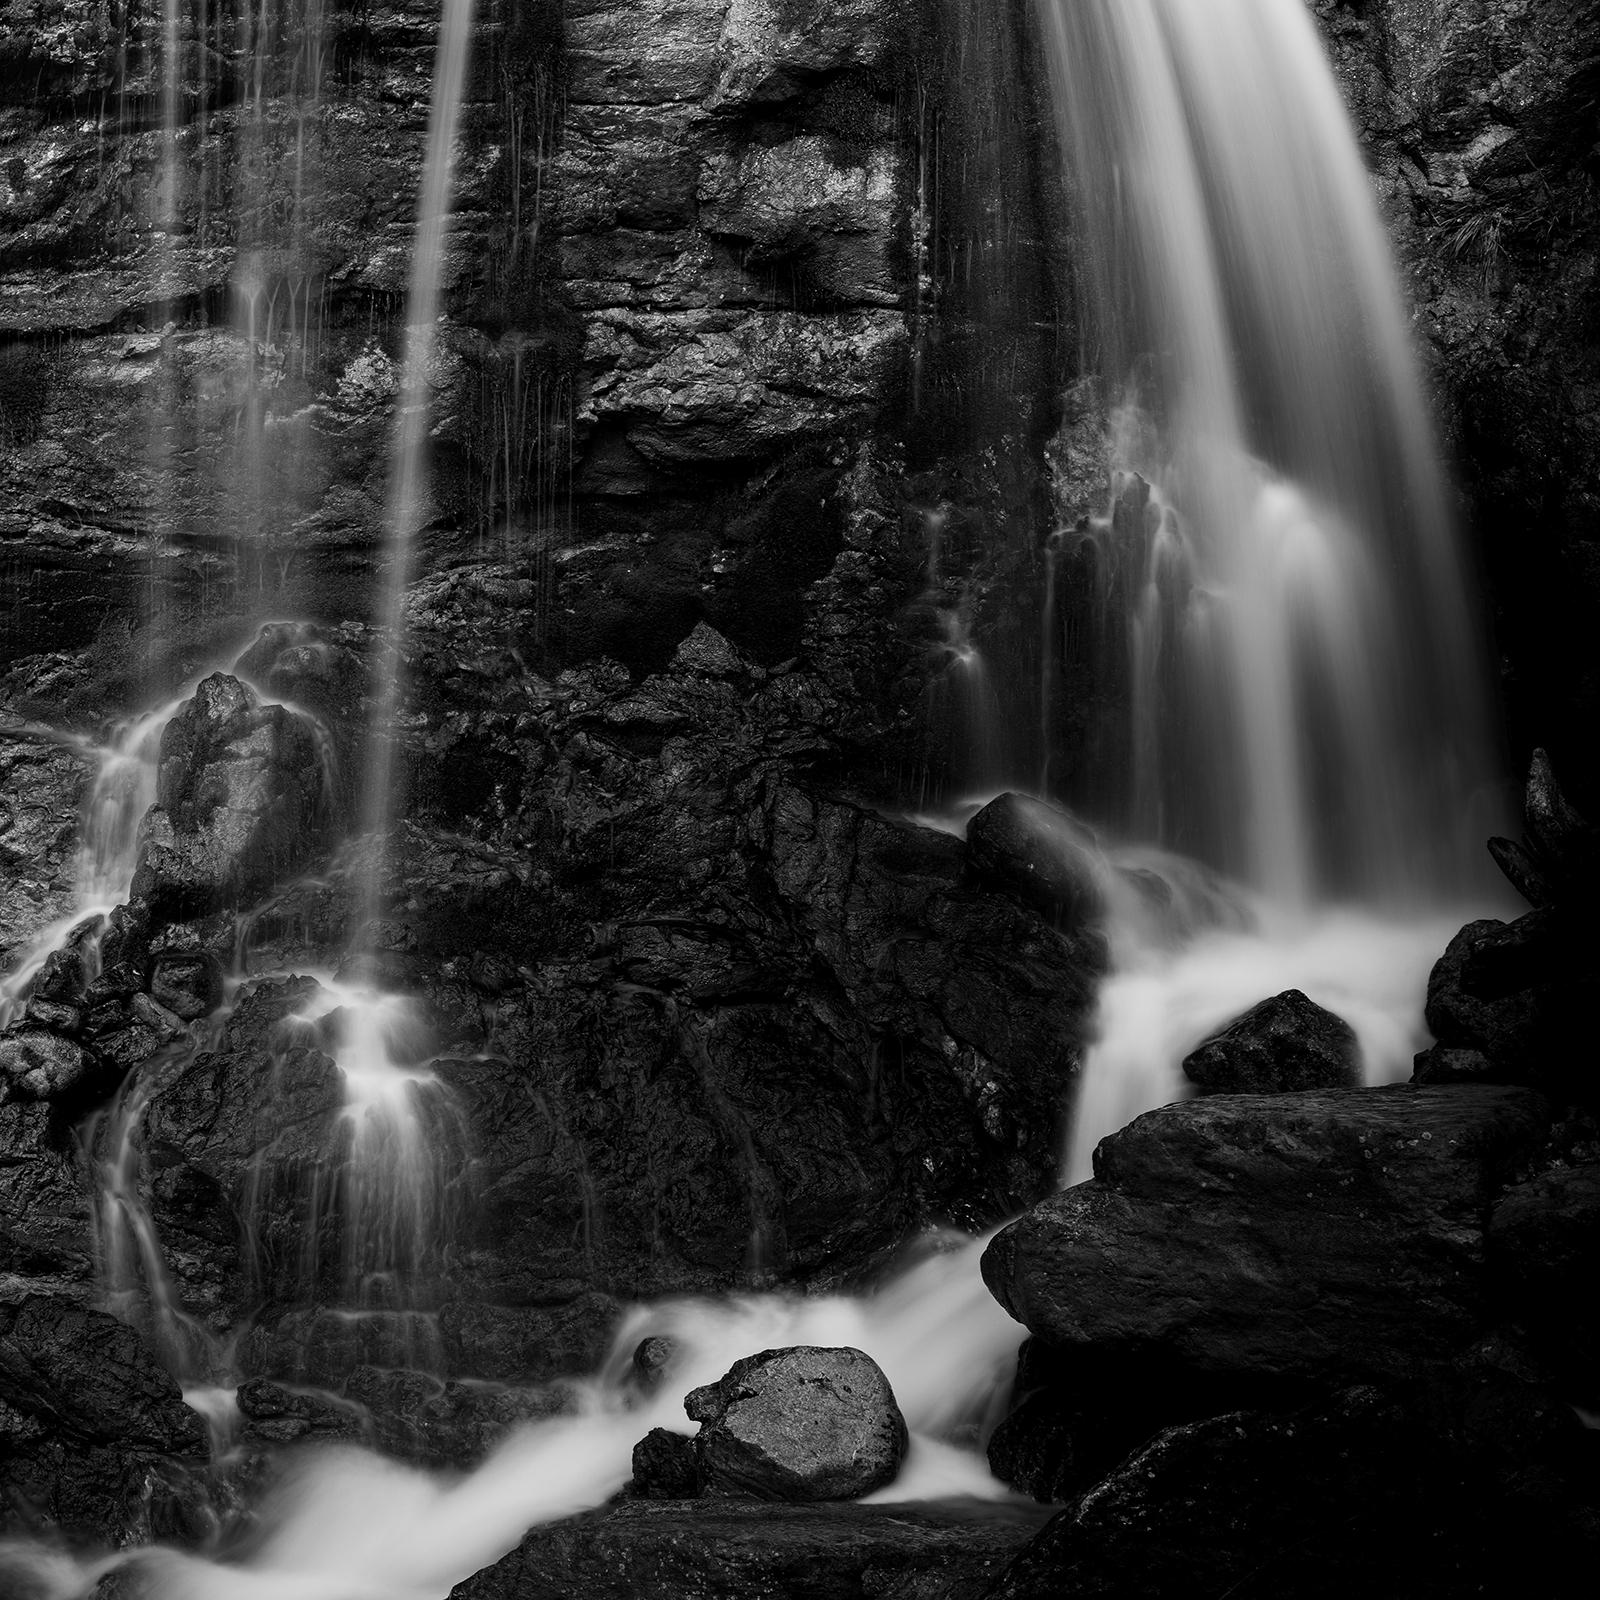 Kuhflucht, lower Waterfall, Germany, black and white art landscape photography For Sale 6